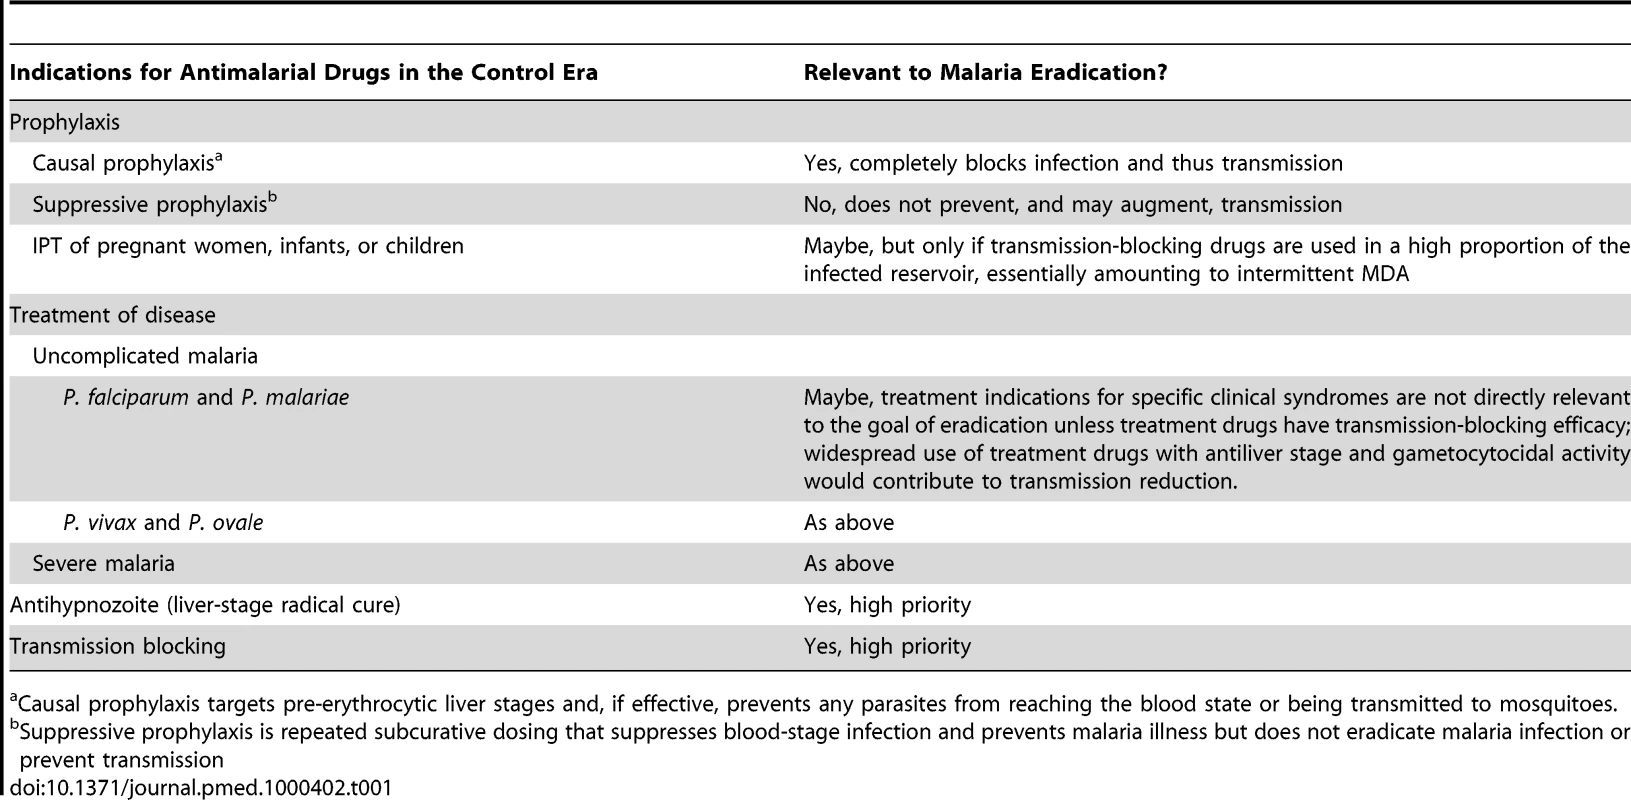 Indications for antimalarial drugs in the present control era and their relevance in the eradication era.